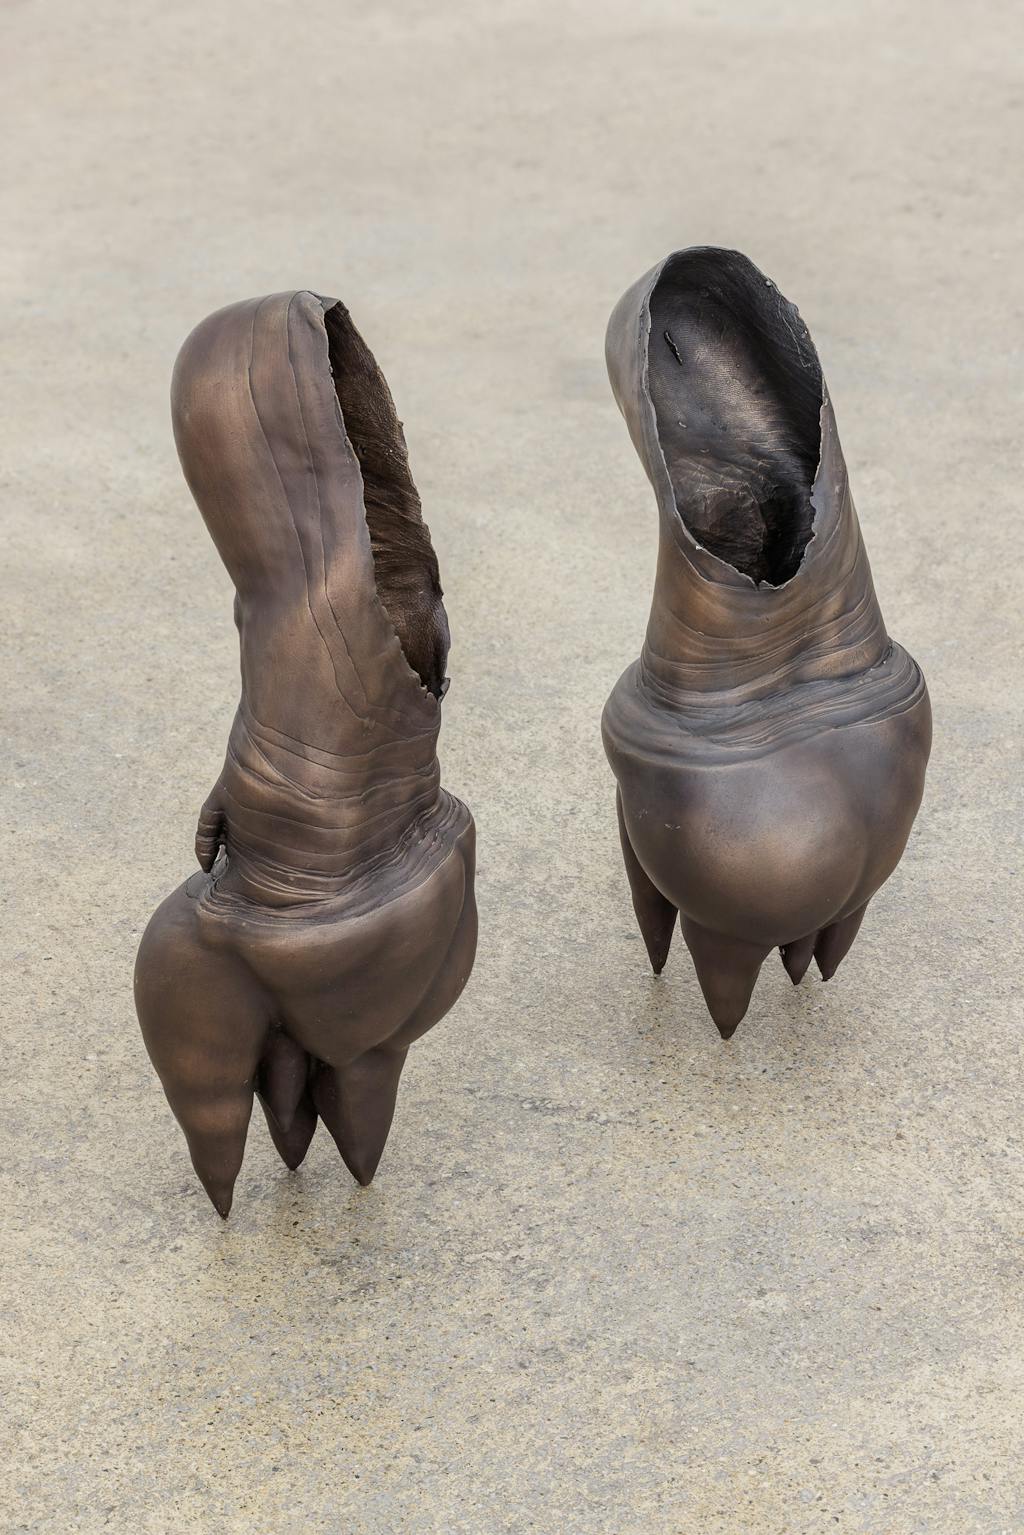 Angelika Loderer
Counterpart (10), 2023
patinated bronze
29 x 13 x 12 cm (left)
33 x 12 x 8 cm (right)
Courtesy of the artist and Sophie Tappeiner, Vienna - © Paris Internationale